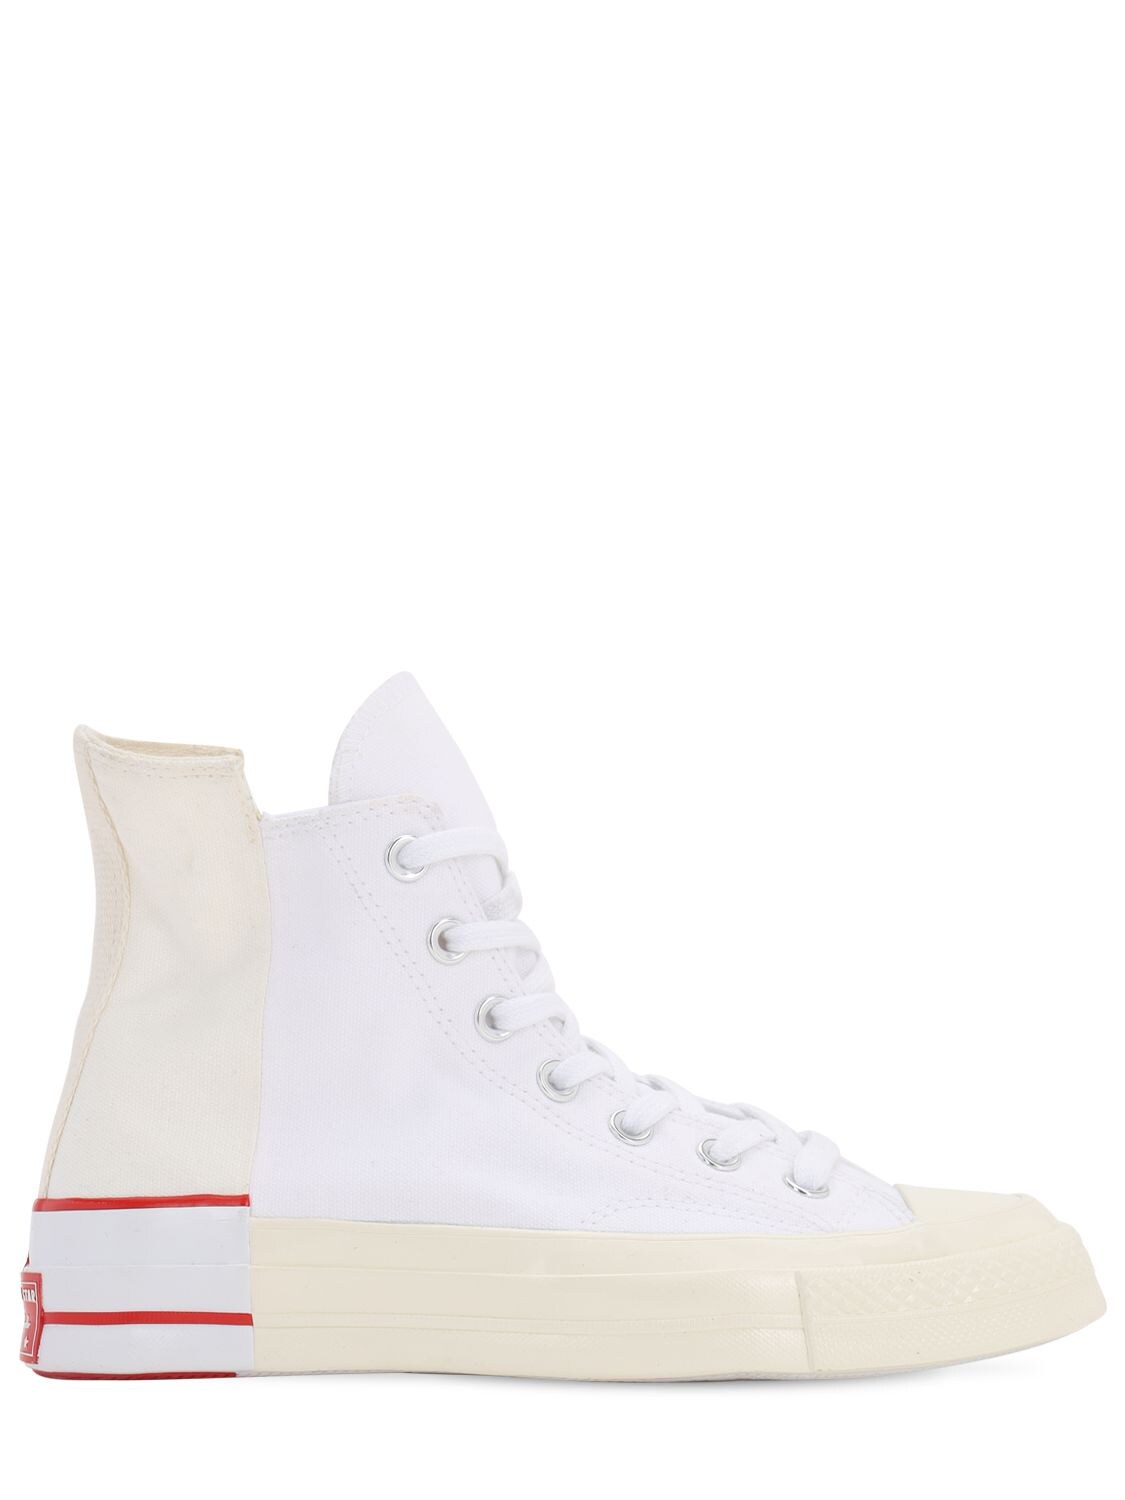 Image of Chuck 70 Twisted Hi Sneakers